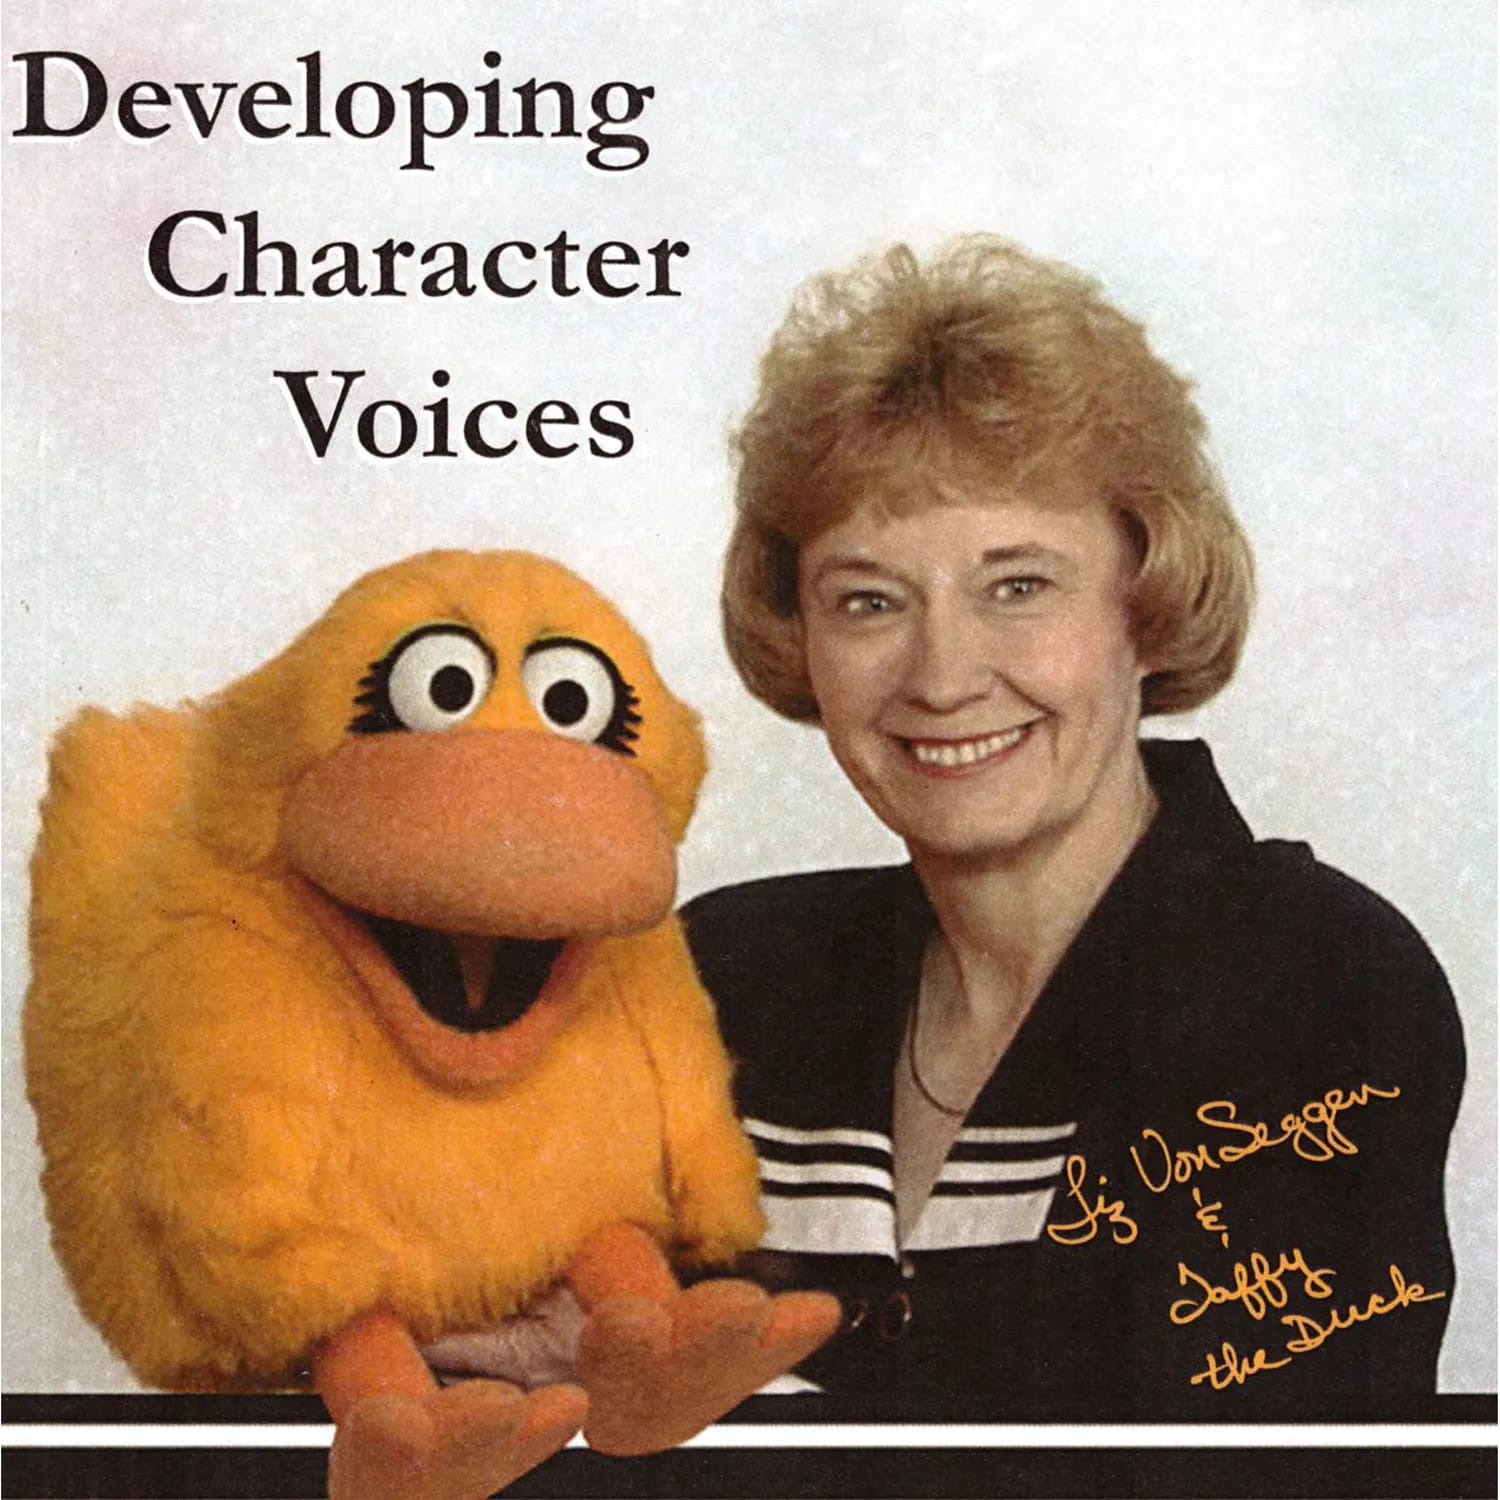 Developing Character Voices Training CD